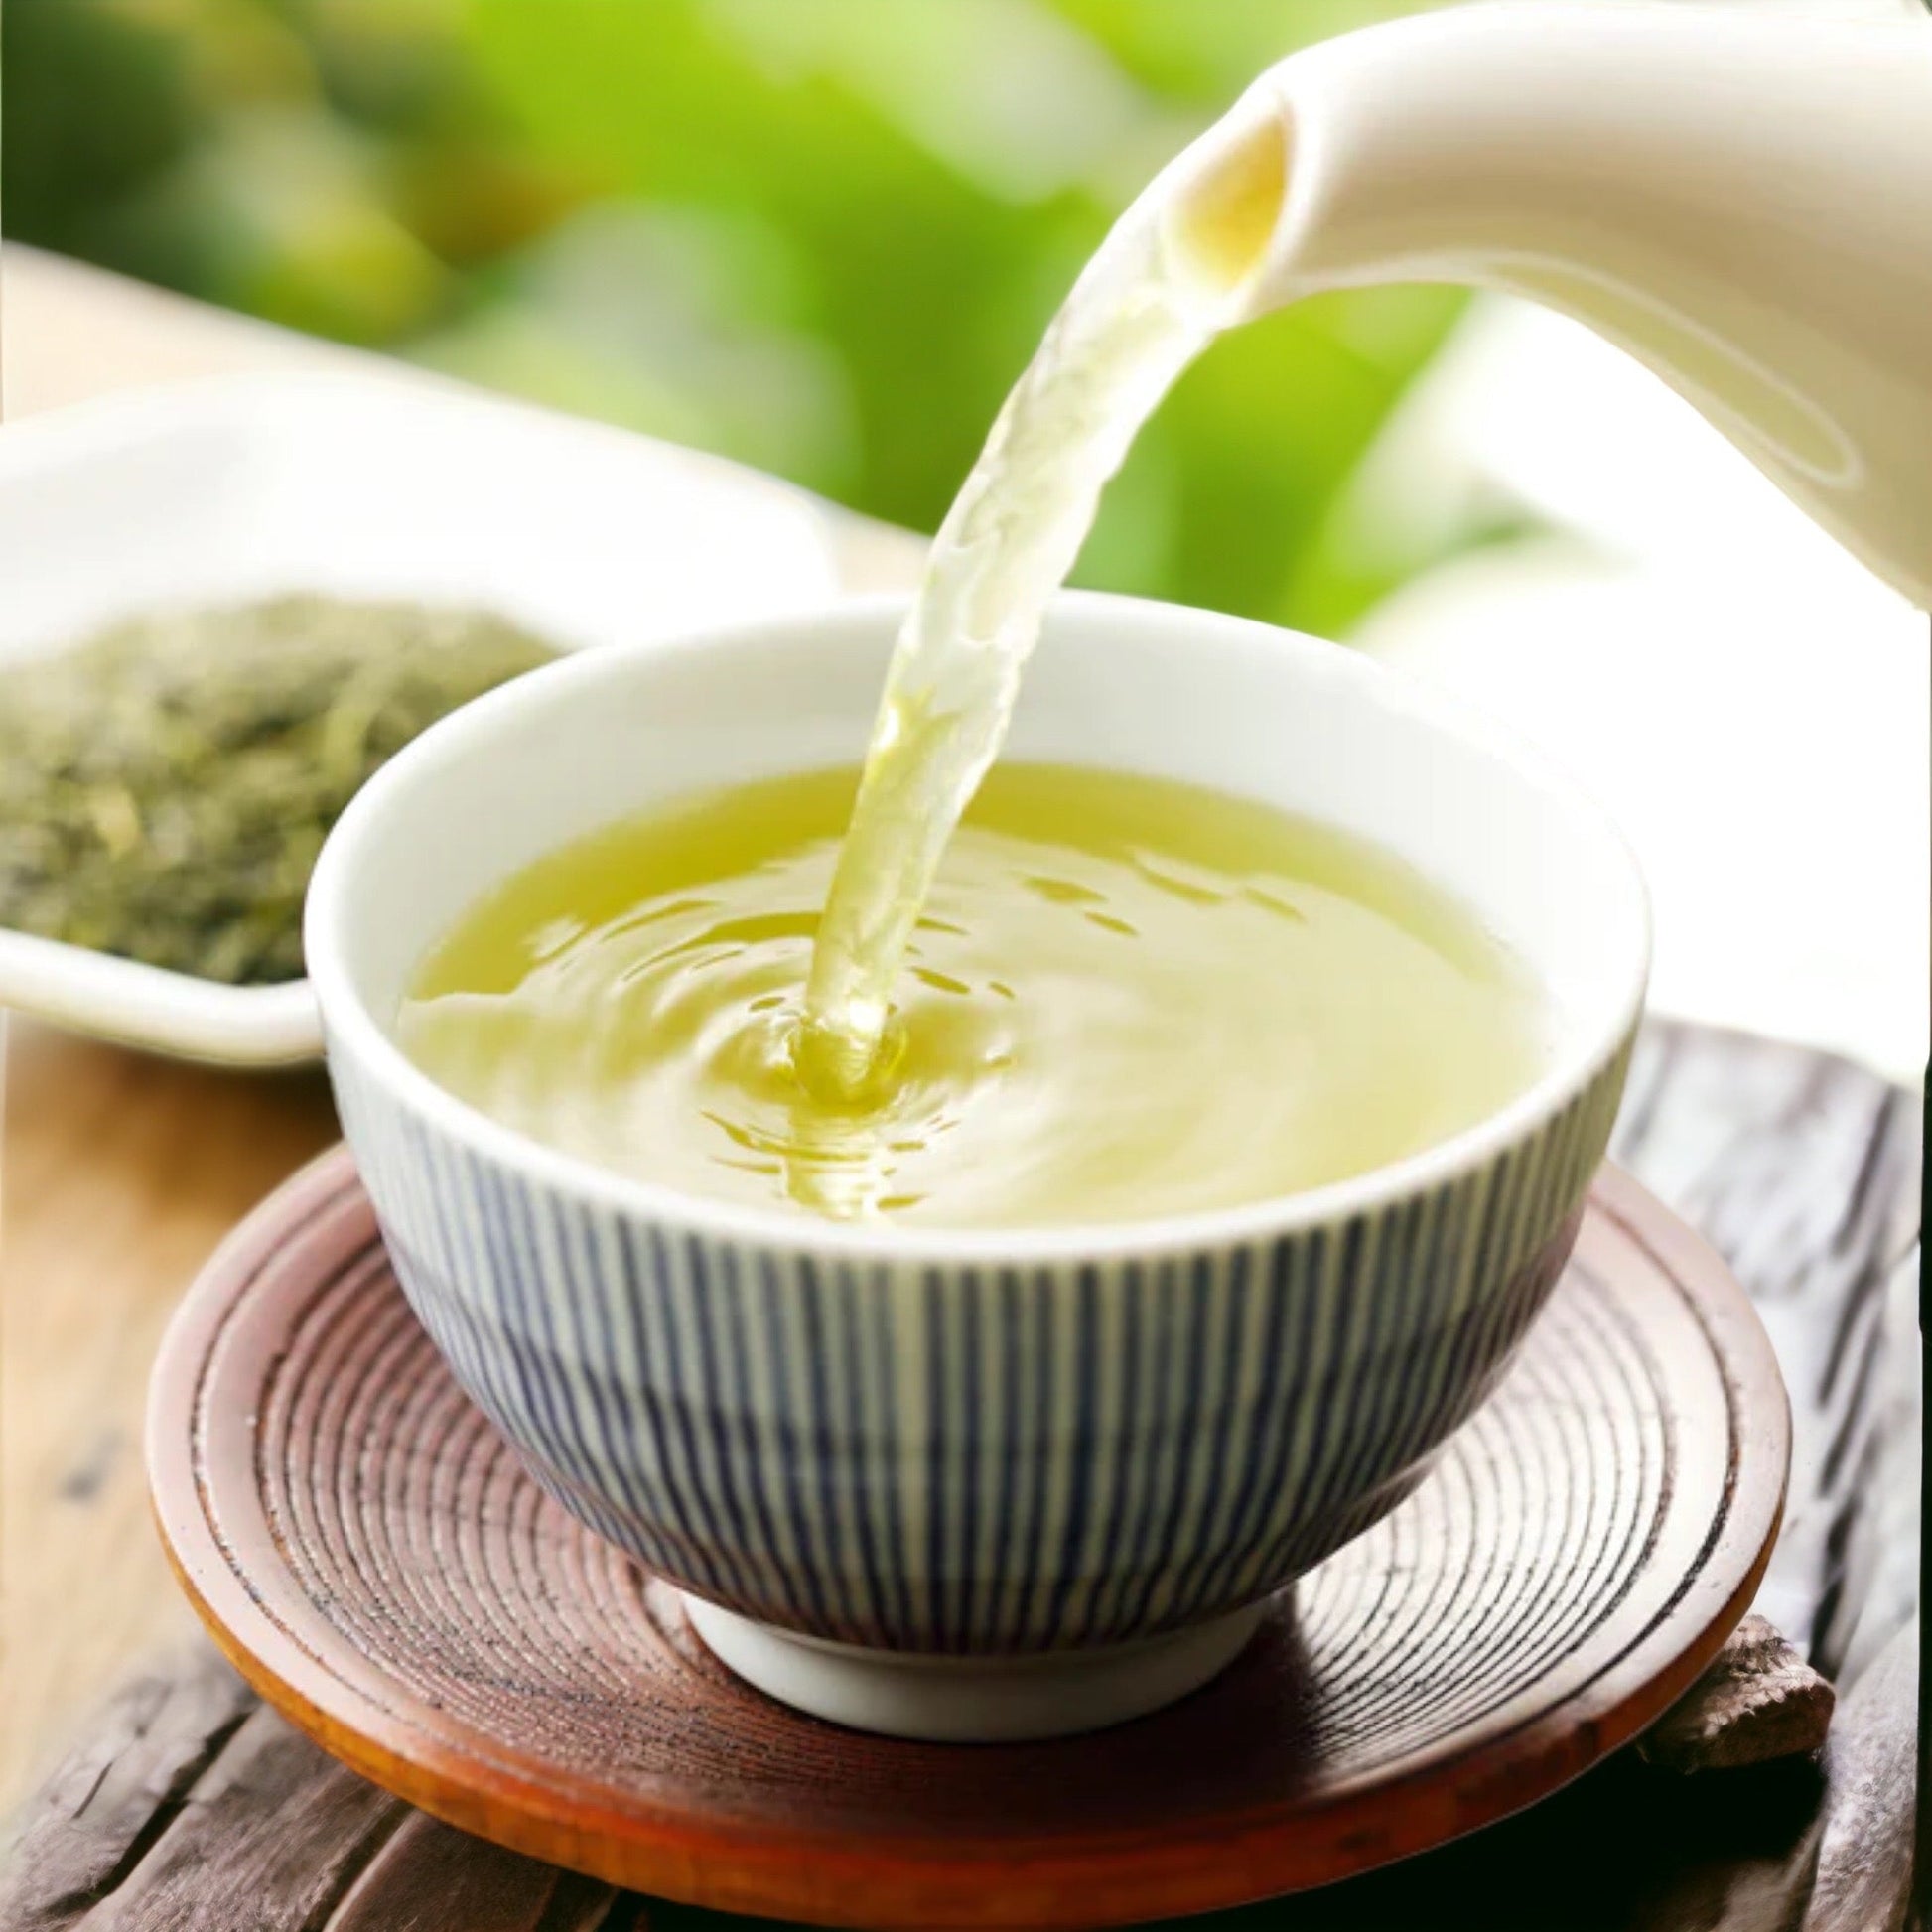 Freshly brewed Sencha Green tea is poured into a cup